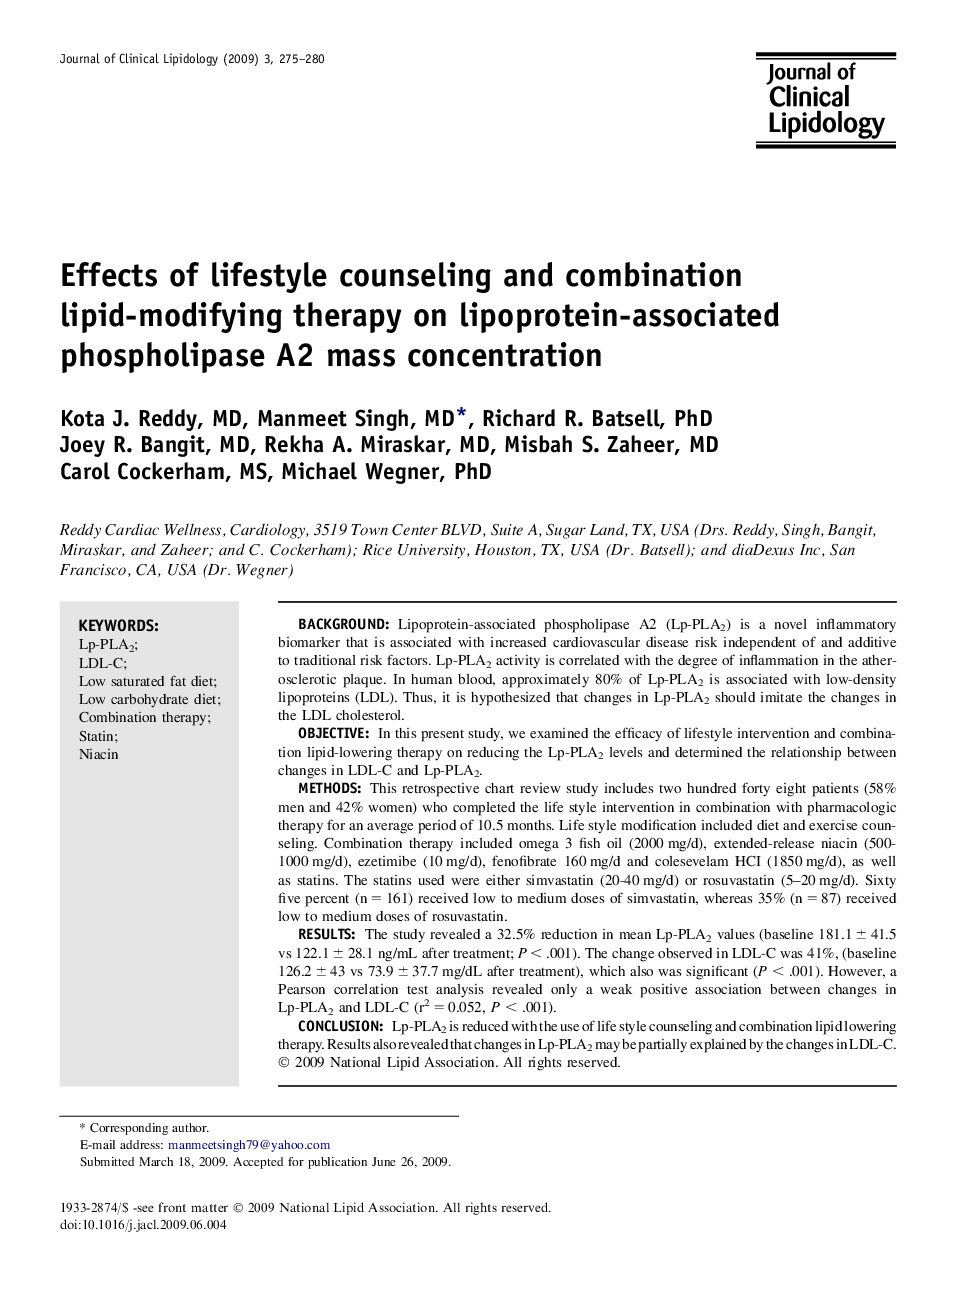 Effects of lifestyle counseling and combination lipid-modifying therapy on lipoprotein-associated phospholipase A2 mass concentration